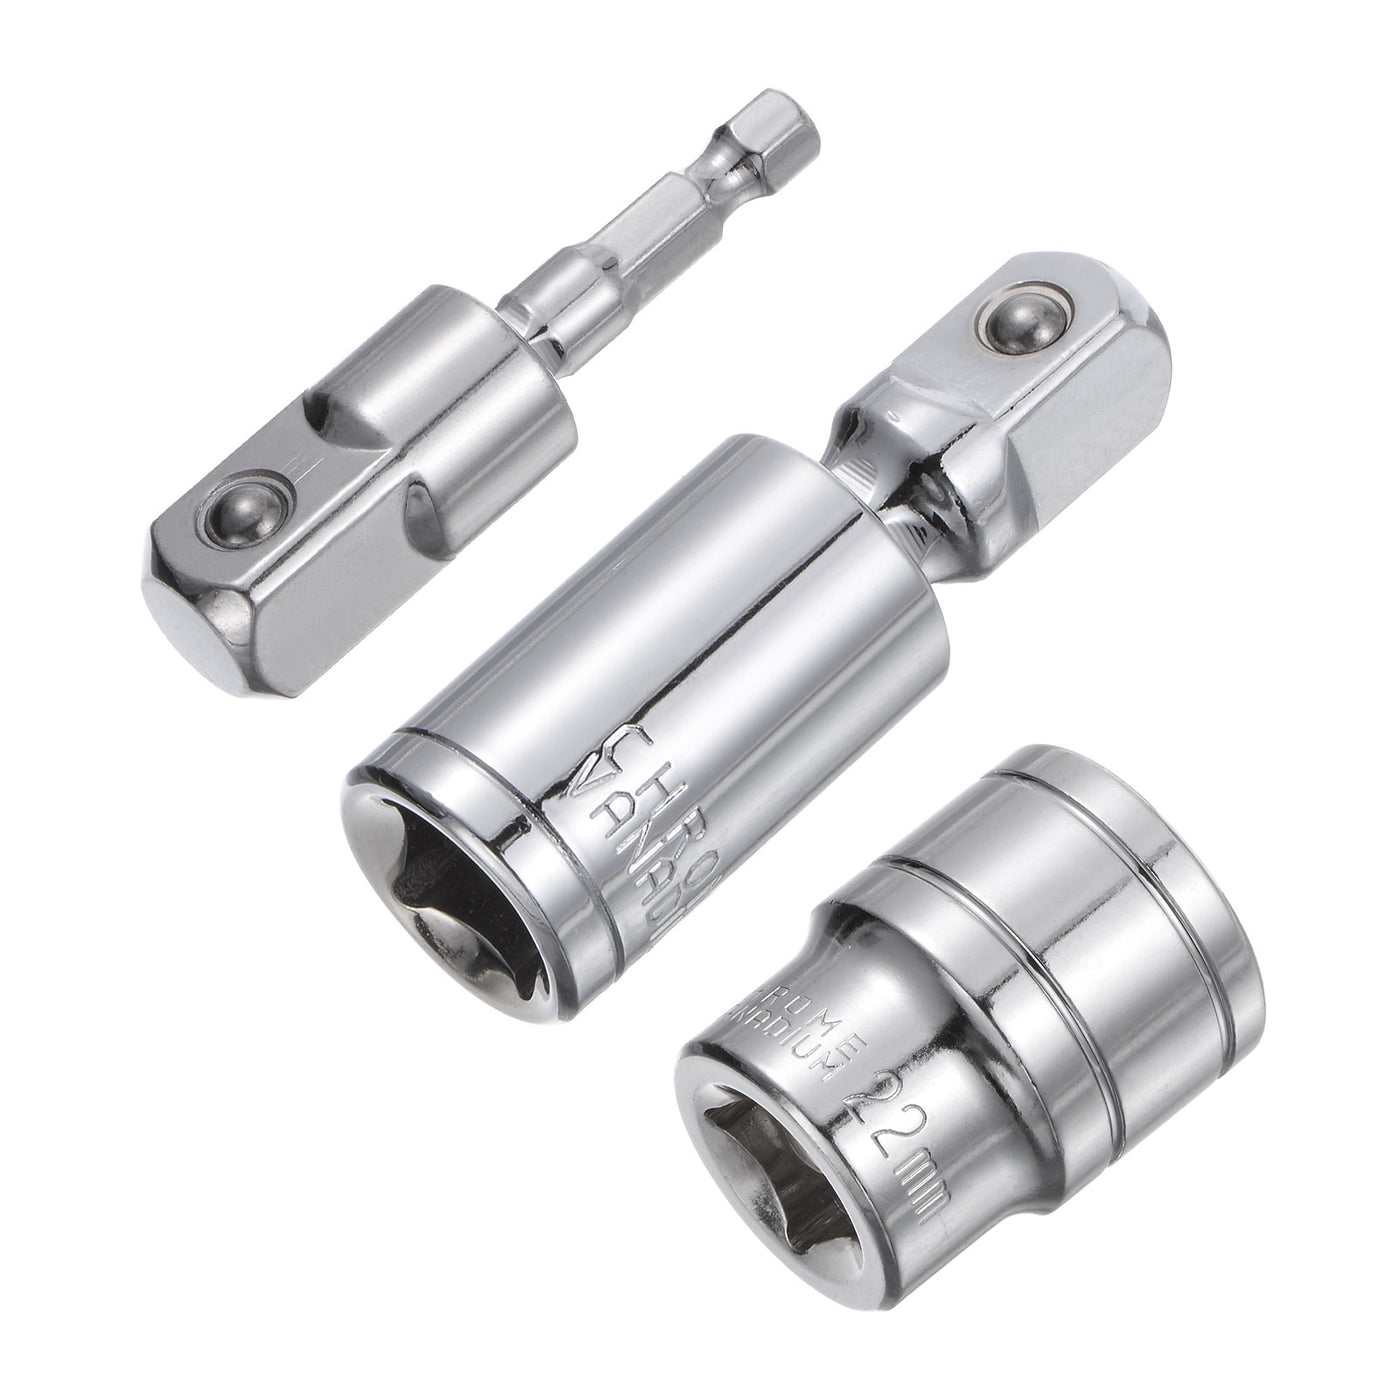 uxcell Uxcell 1/2" Drive 22mm Shallow Socket Swivel Joints Hex Shank Impact Driver Adaptor Set